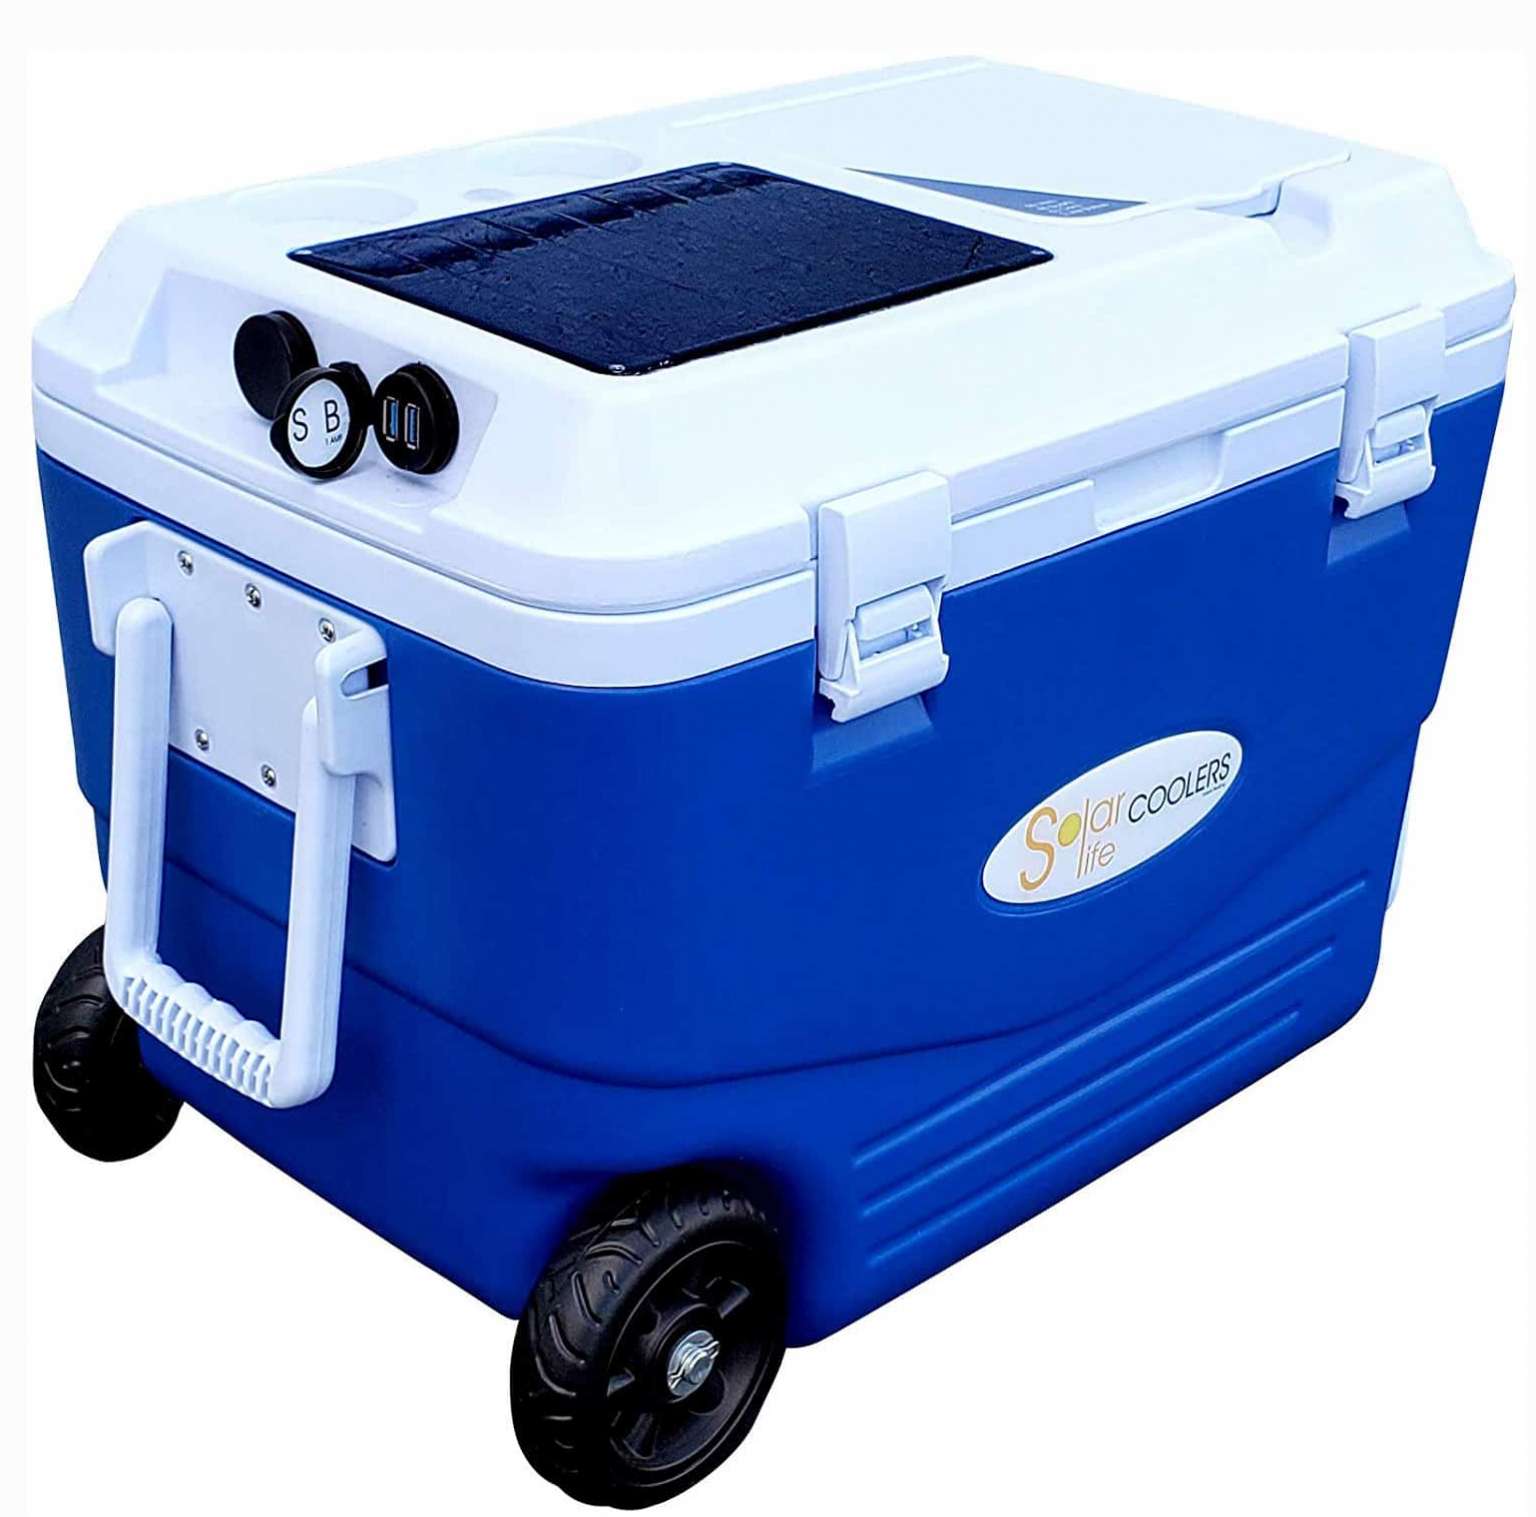 Top 10 Best Wheeled Coolers for Camping in 2021 Reviews | Guide